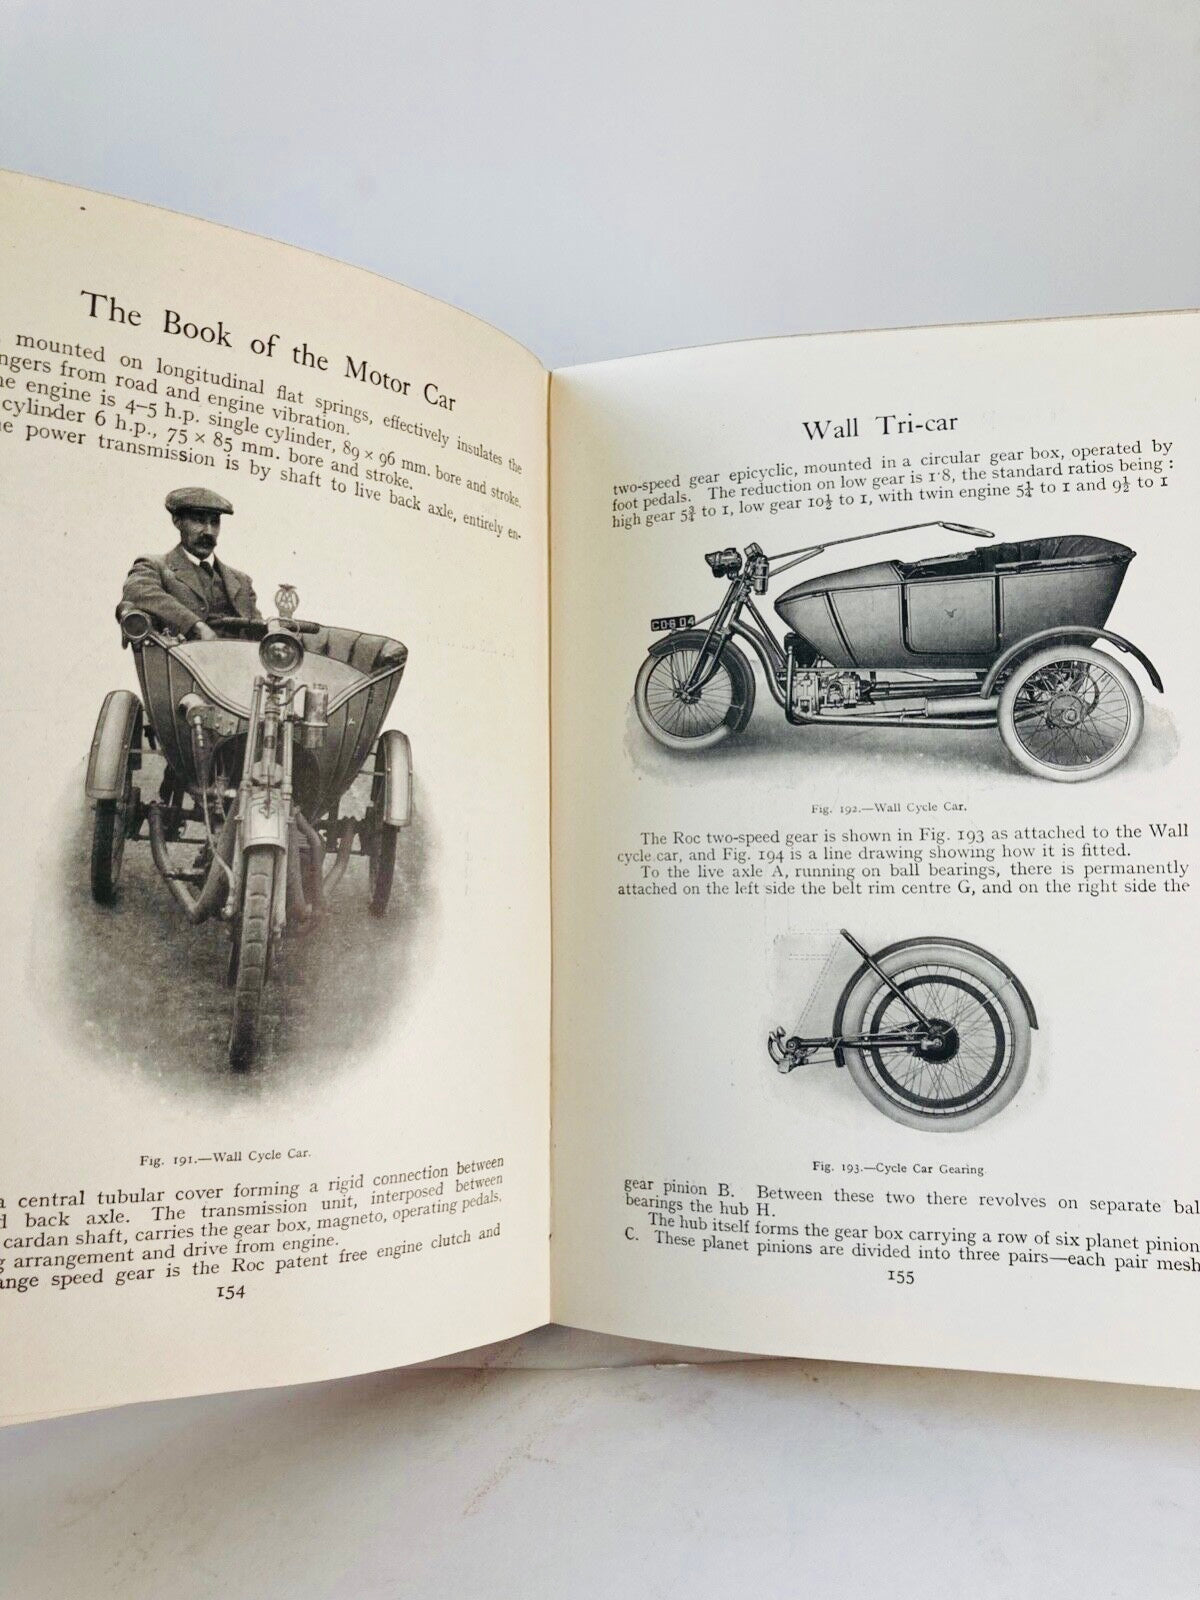 The Book of the Motor Car Rankin  Kennedy 3 Volumes